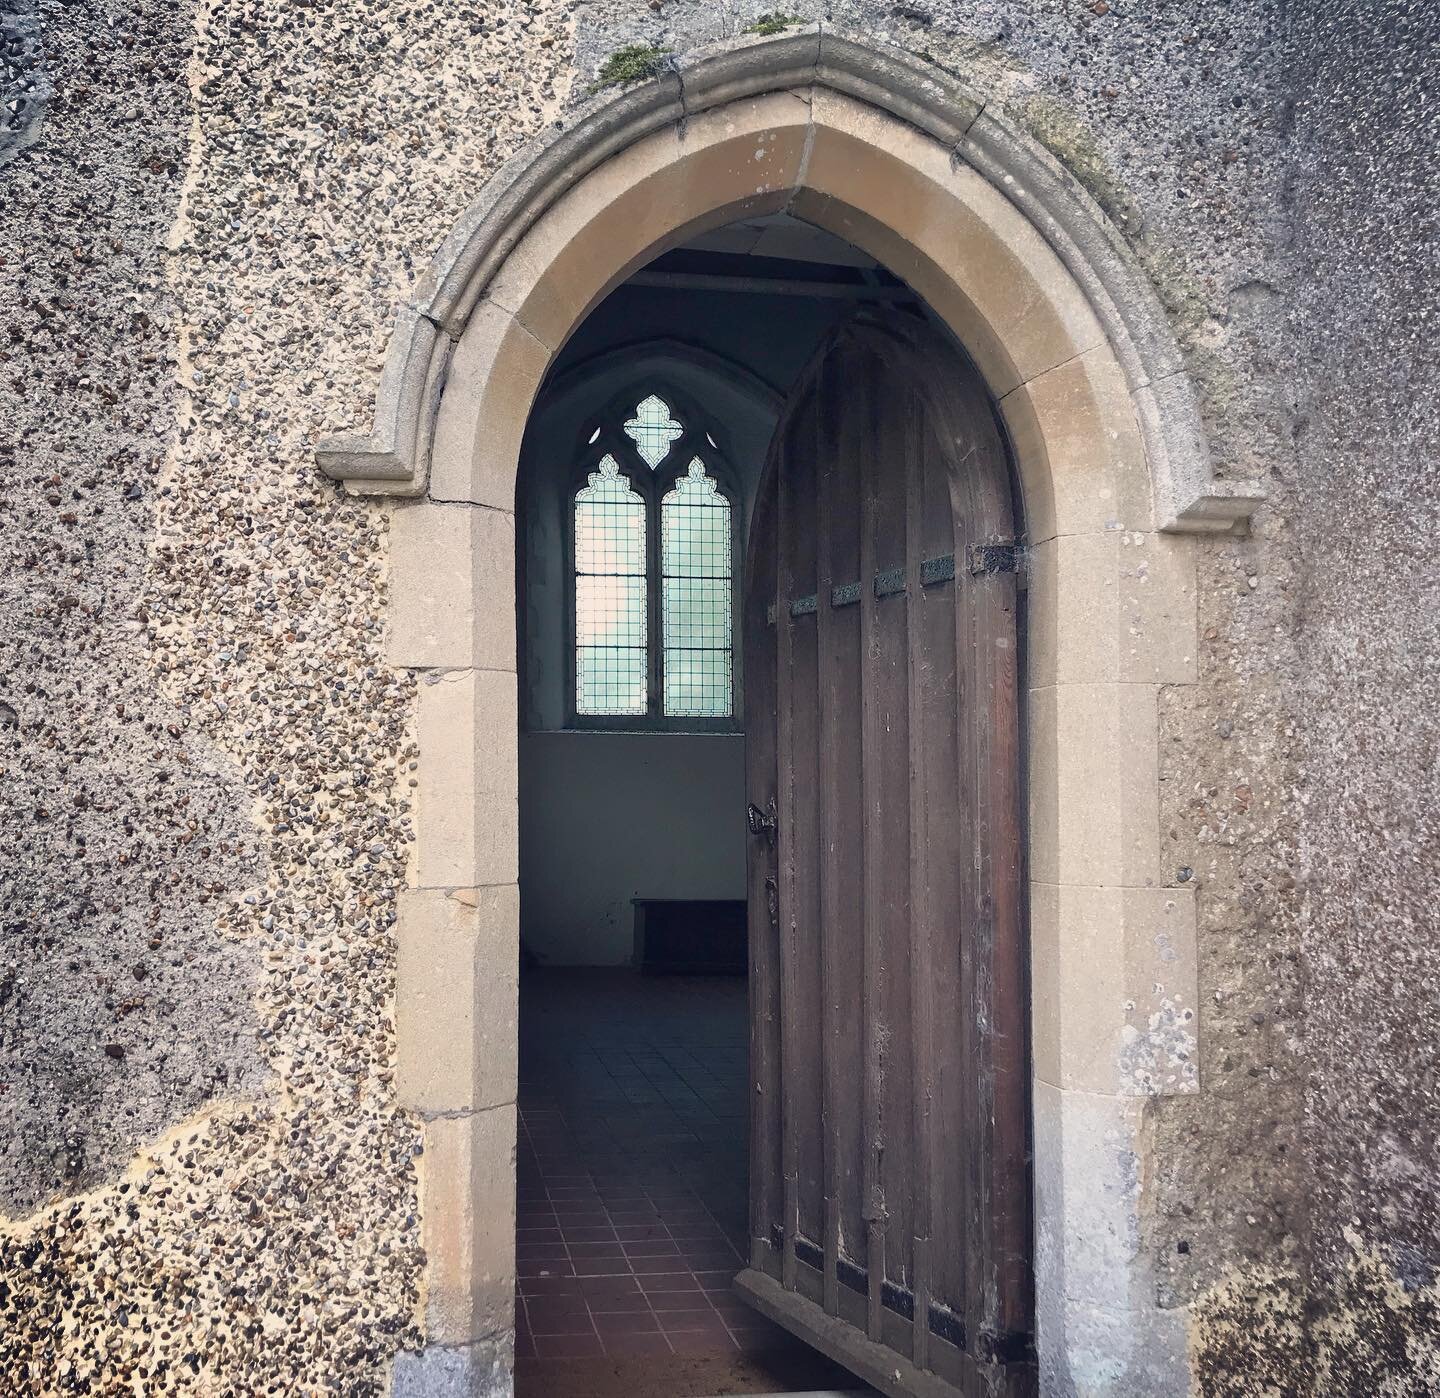 COME ON IN // 3pm on Sunday September 8th is the annual service at St Augustine&rsquo;s Snave. Yes, that&rsquo;s right, as a redundant church, just one service a year is permitted under the care of Romney Marsh Historic Churches Trust. We arrange the